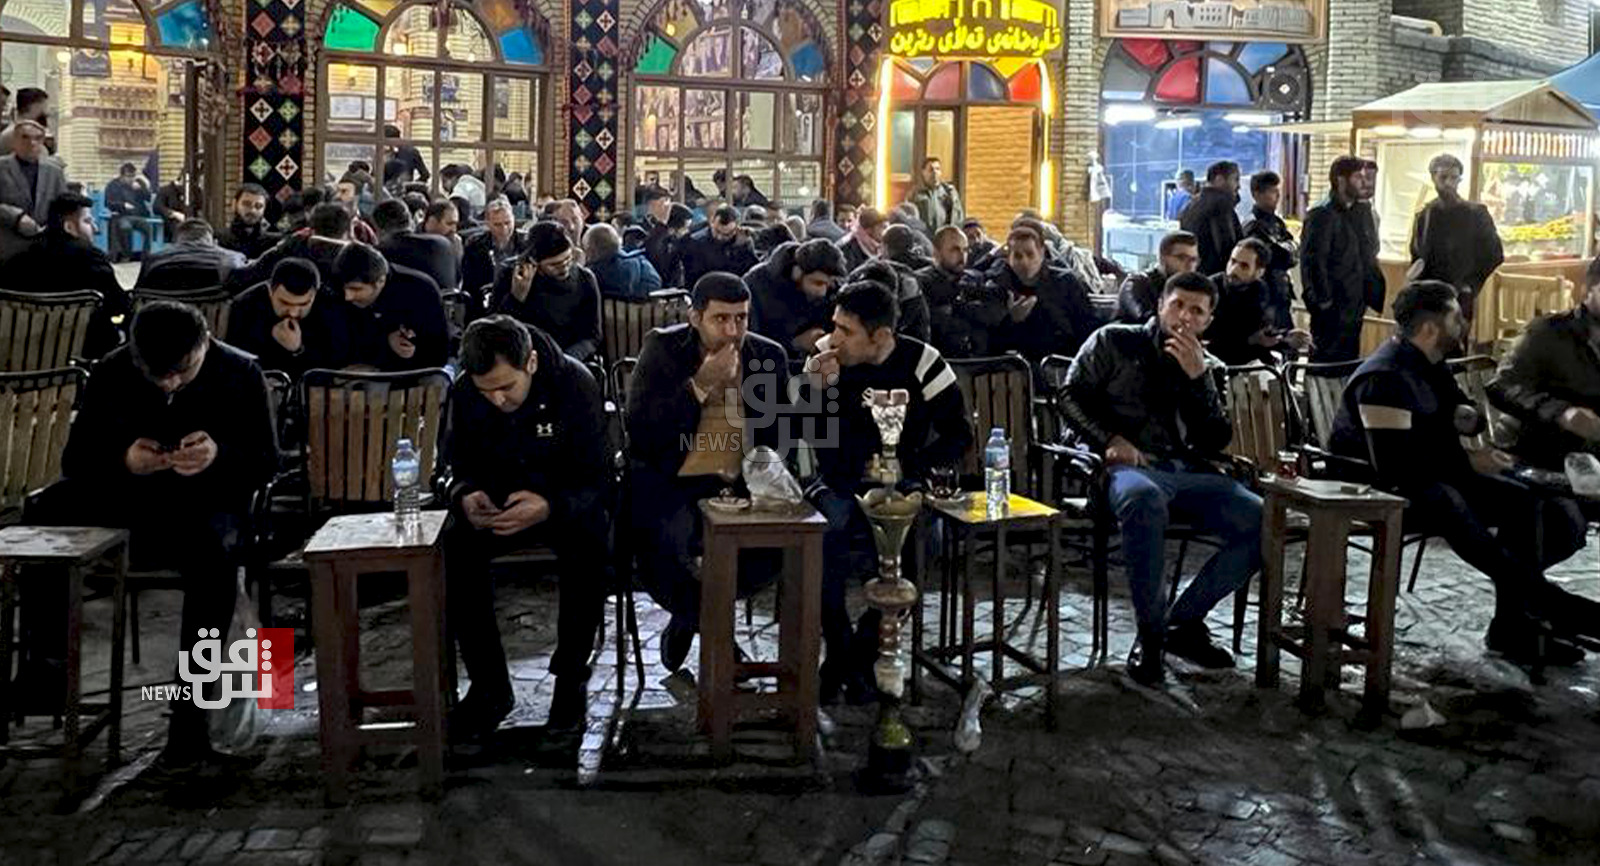 Ramadan festivities in Erbil bring locals together in bustling markets and cafes